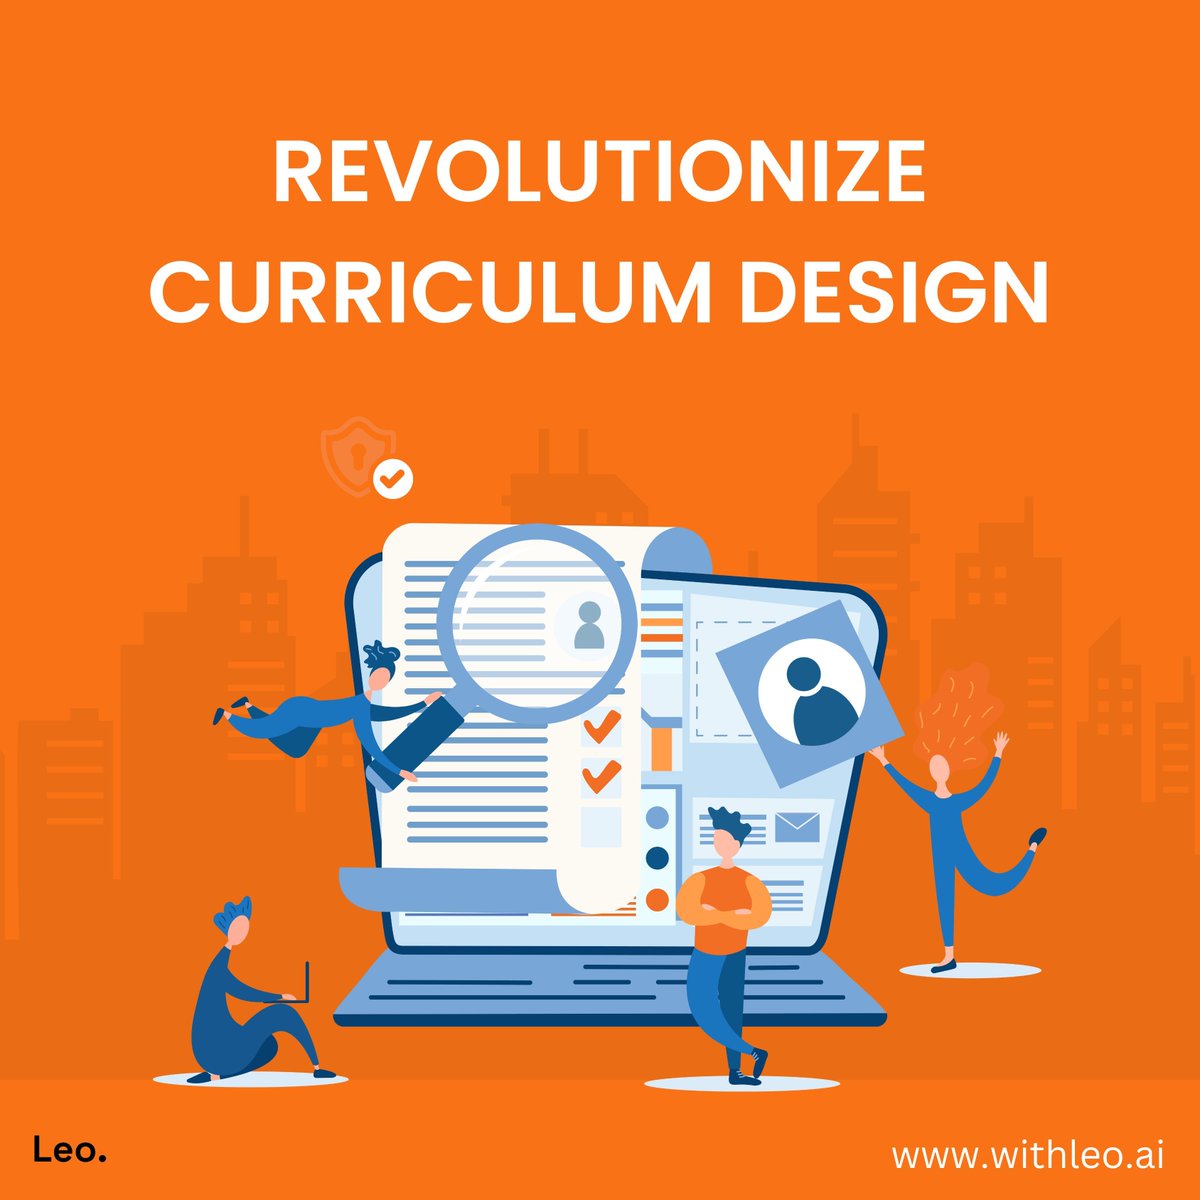 Enhance your curriculum with Leo's #AI tools for diverse and comprehensive content creation. Quickly generate question sets, reading materials, and exercises at buff.ly/4brq6EO #edtech #education #teaching #AIinEducation #TeacherTools #TeachingAssistants #EducationalAI